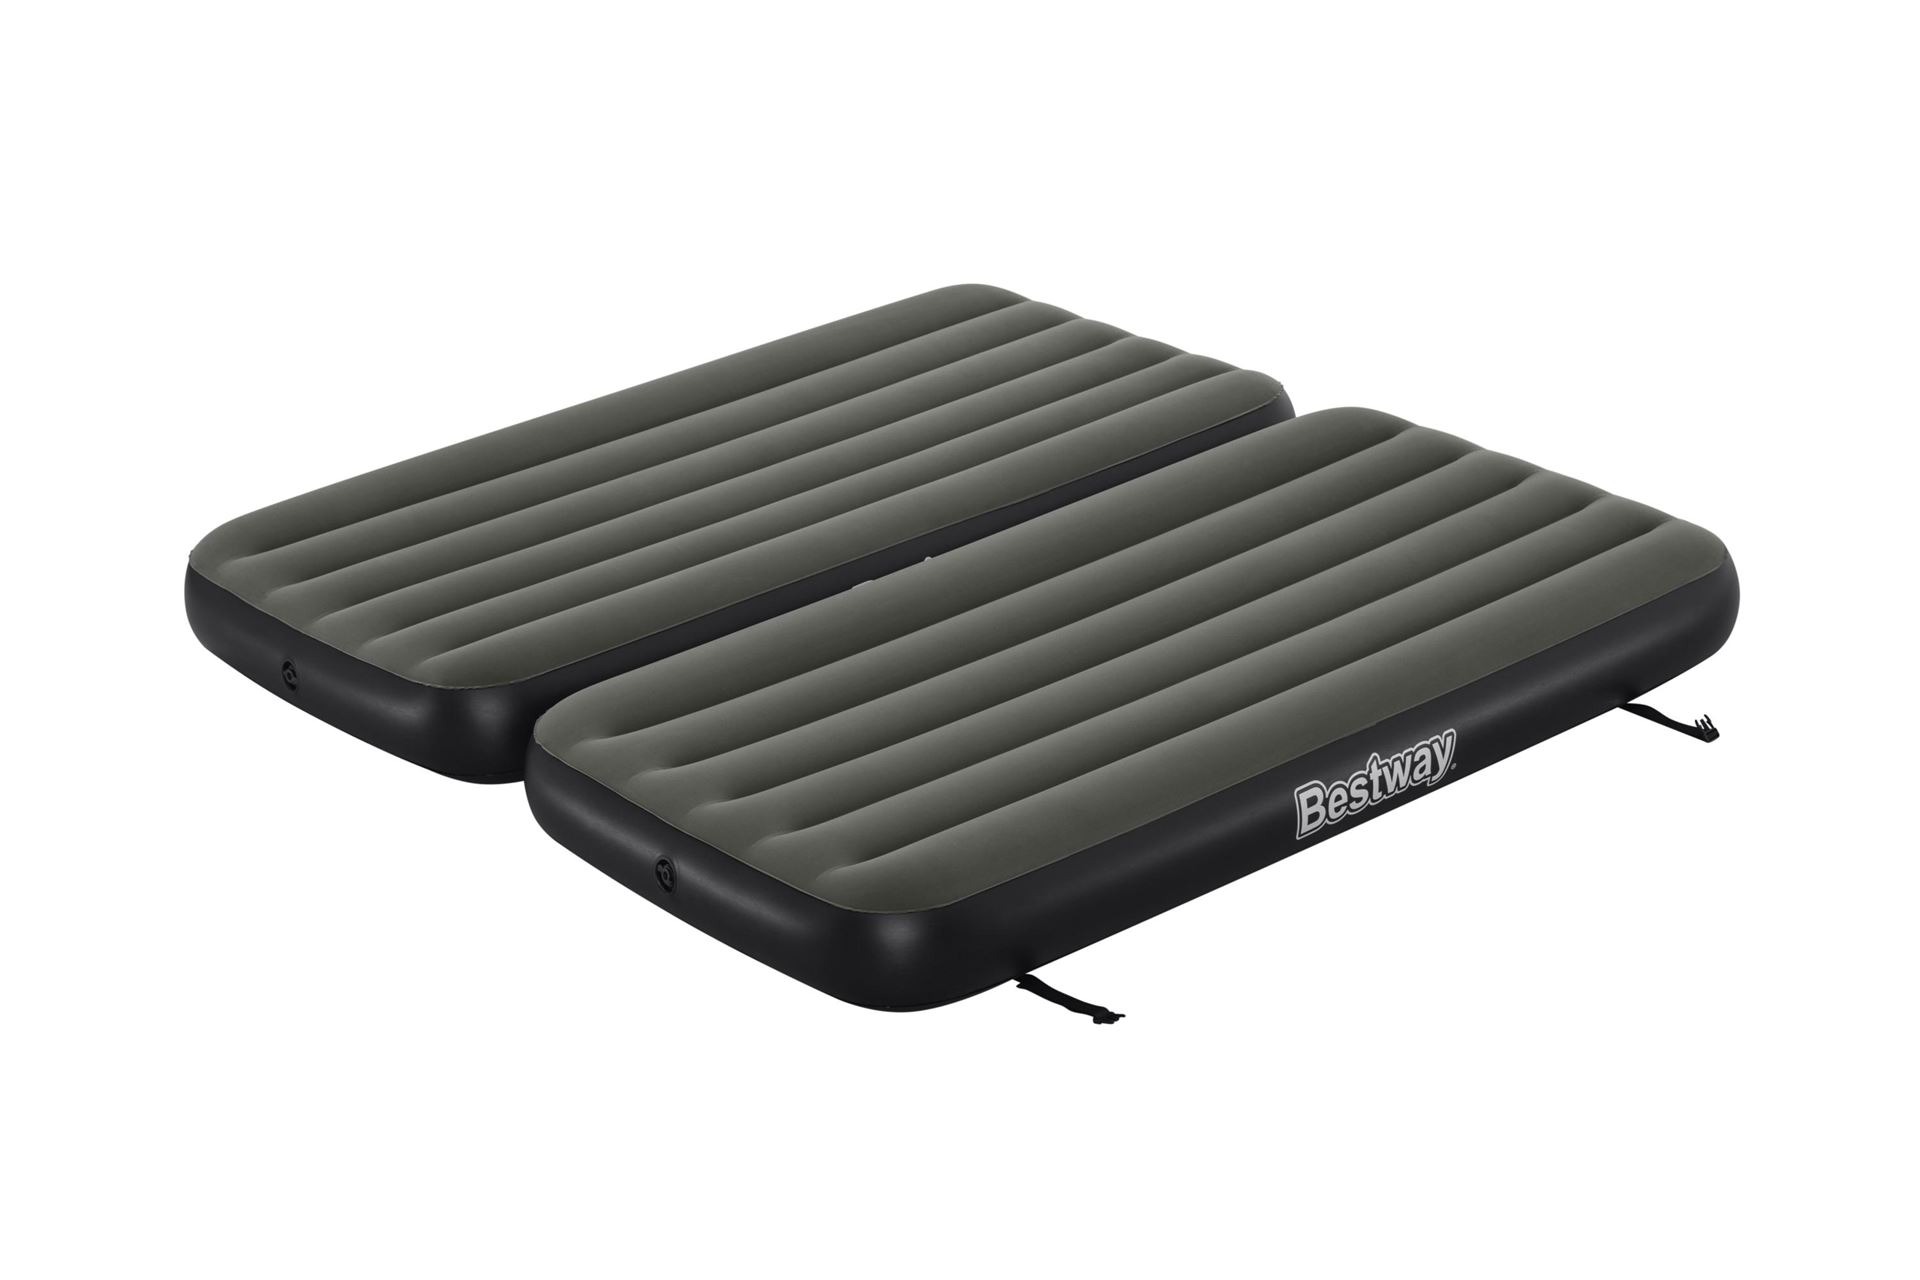 Bestway-74-x-39-x-10-1-88m-x-99cm-x-25cm-Tritech-Connect-and-Rest-3-in-1-Air-Mattress-Twin-King